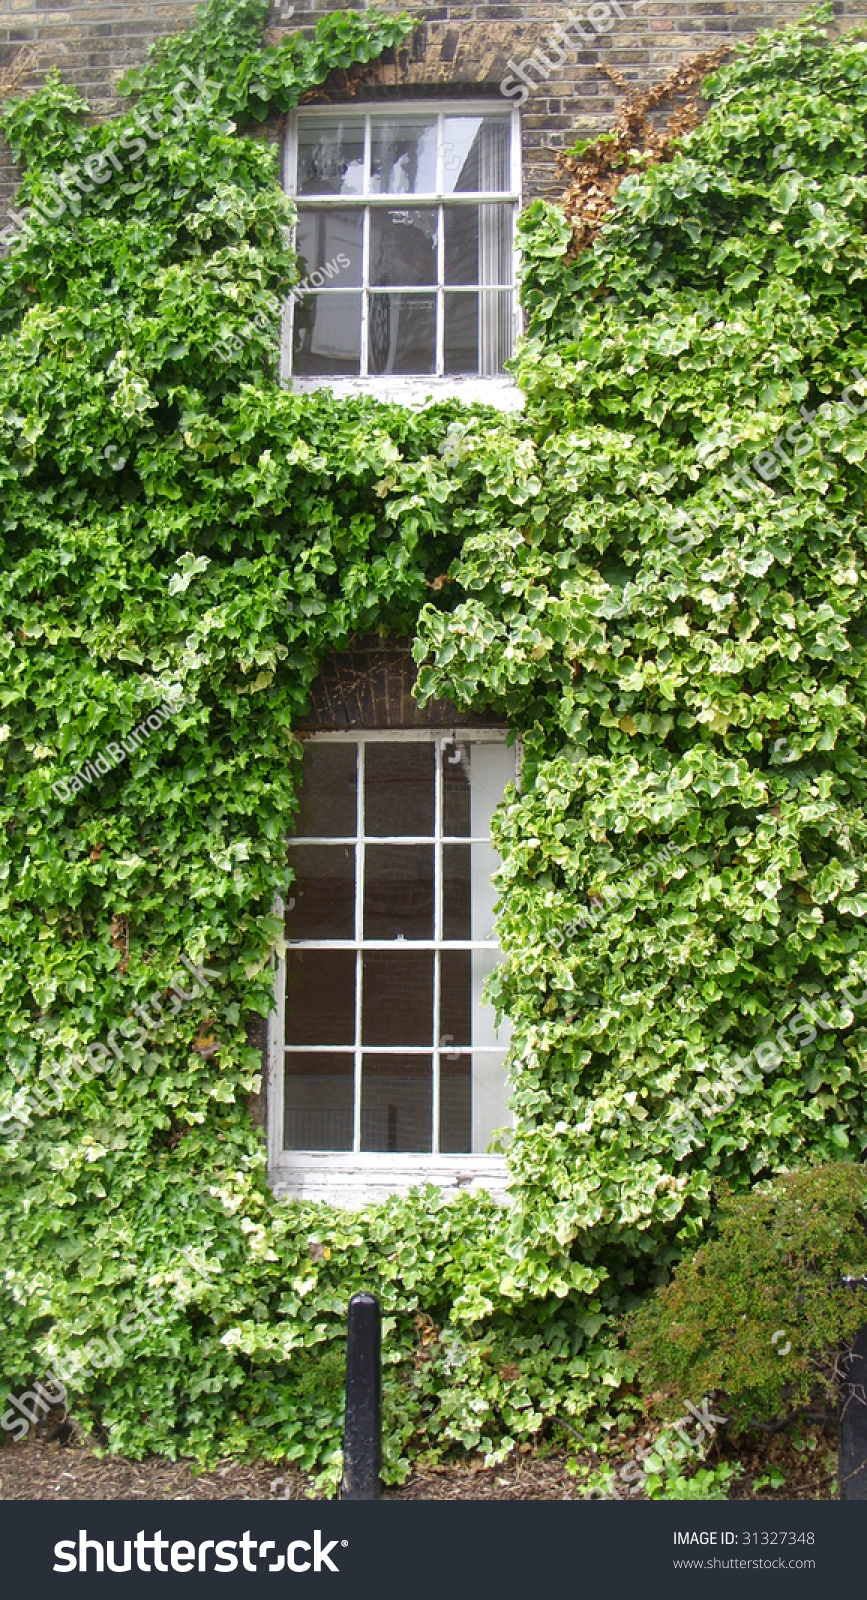 Ivy Covered Windows. Stock Photo 31327348 : Shutterstock